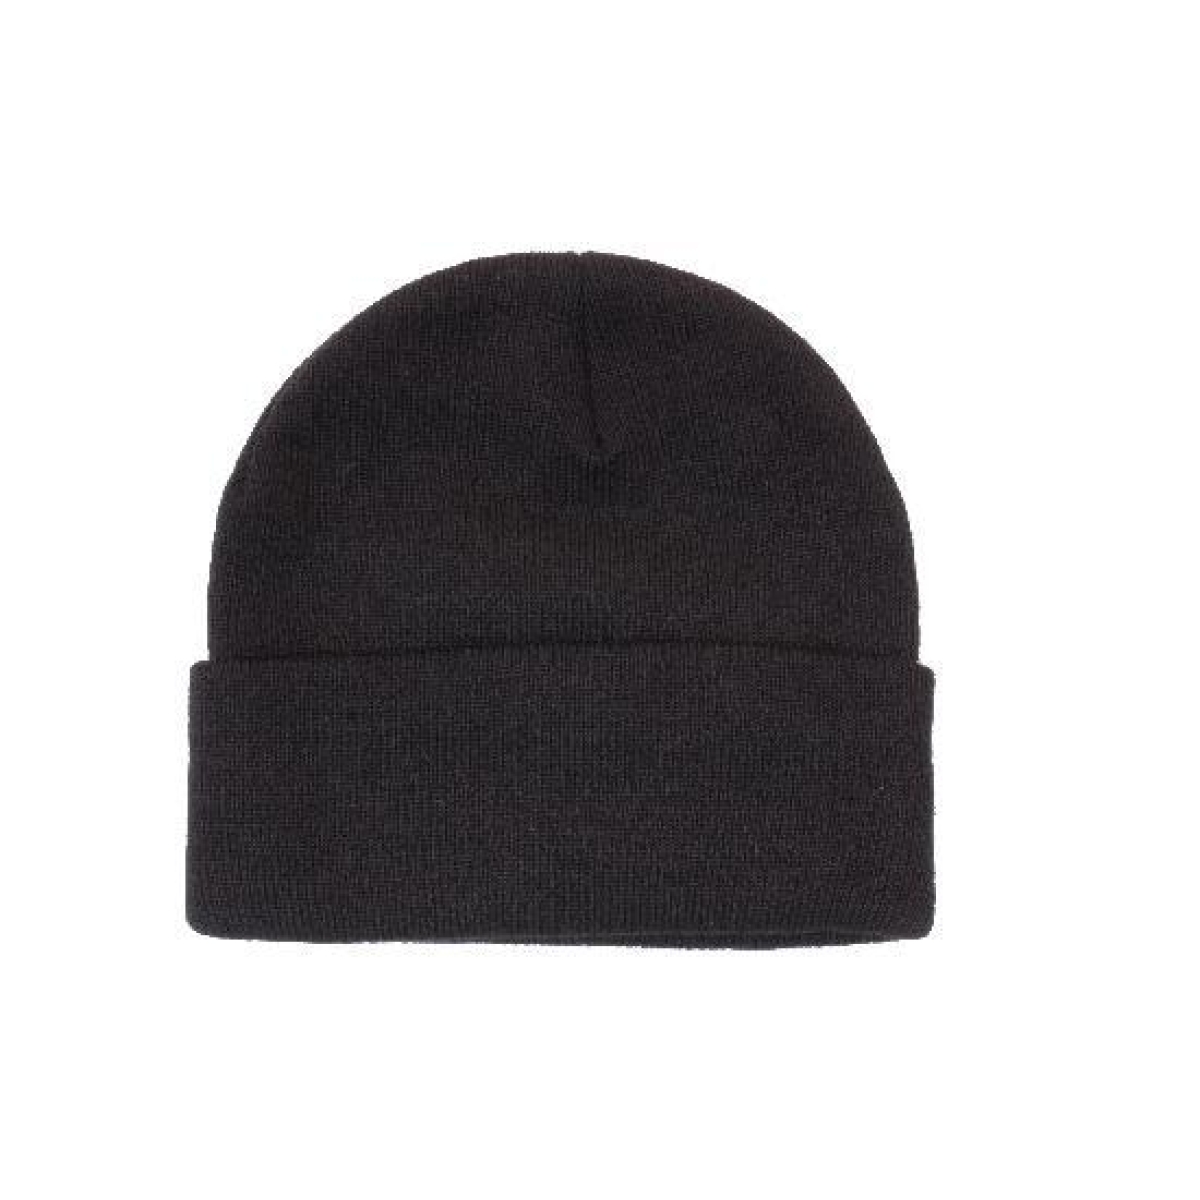 Acrylic Black Beanie with Thinsulate Lining